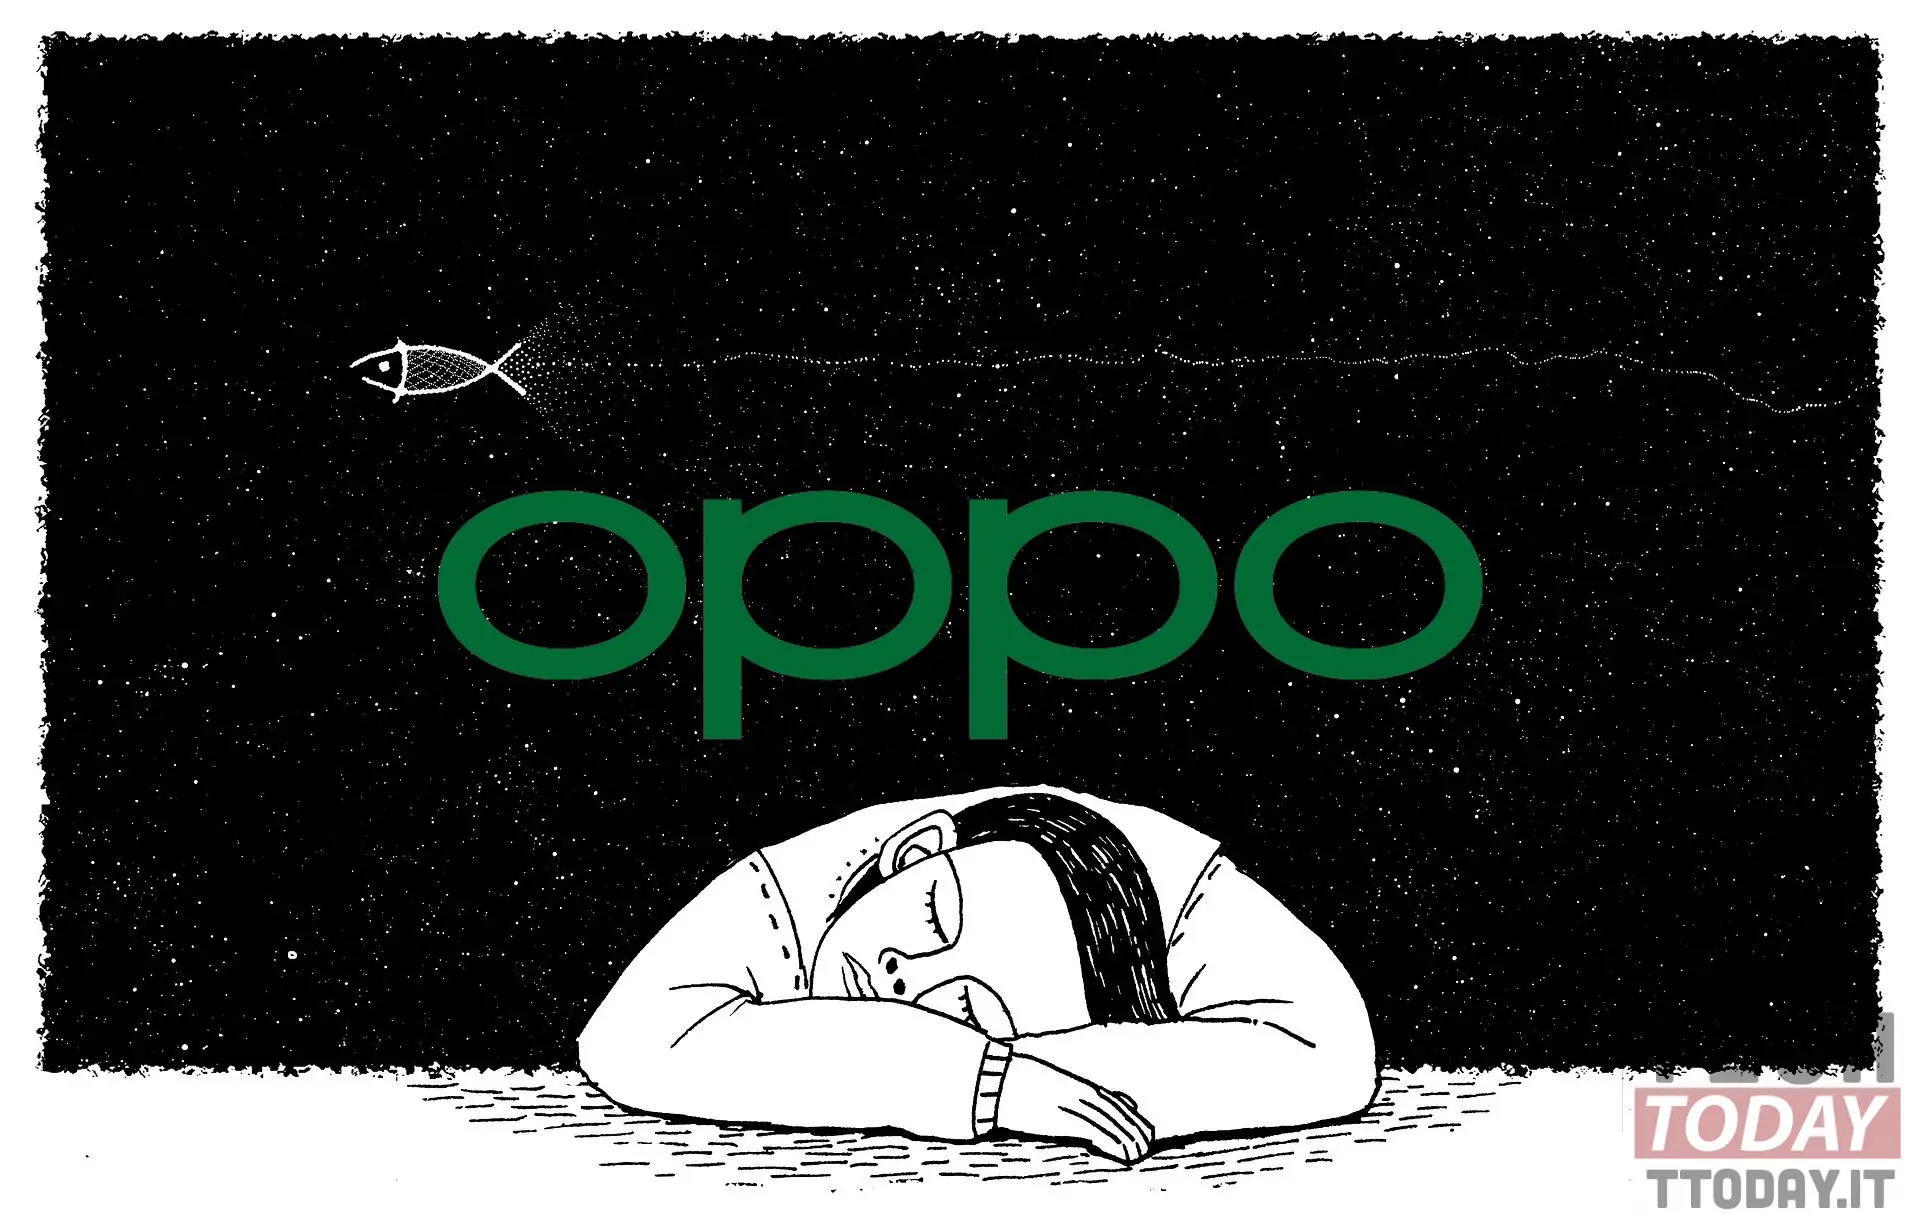 Oppo makes you find sleep easily by training your brain